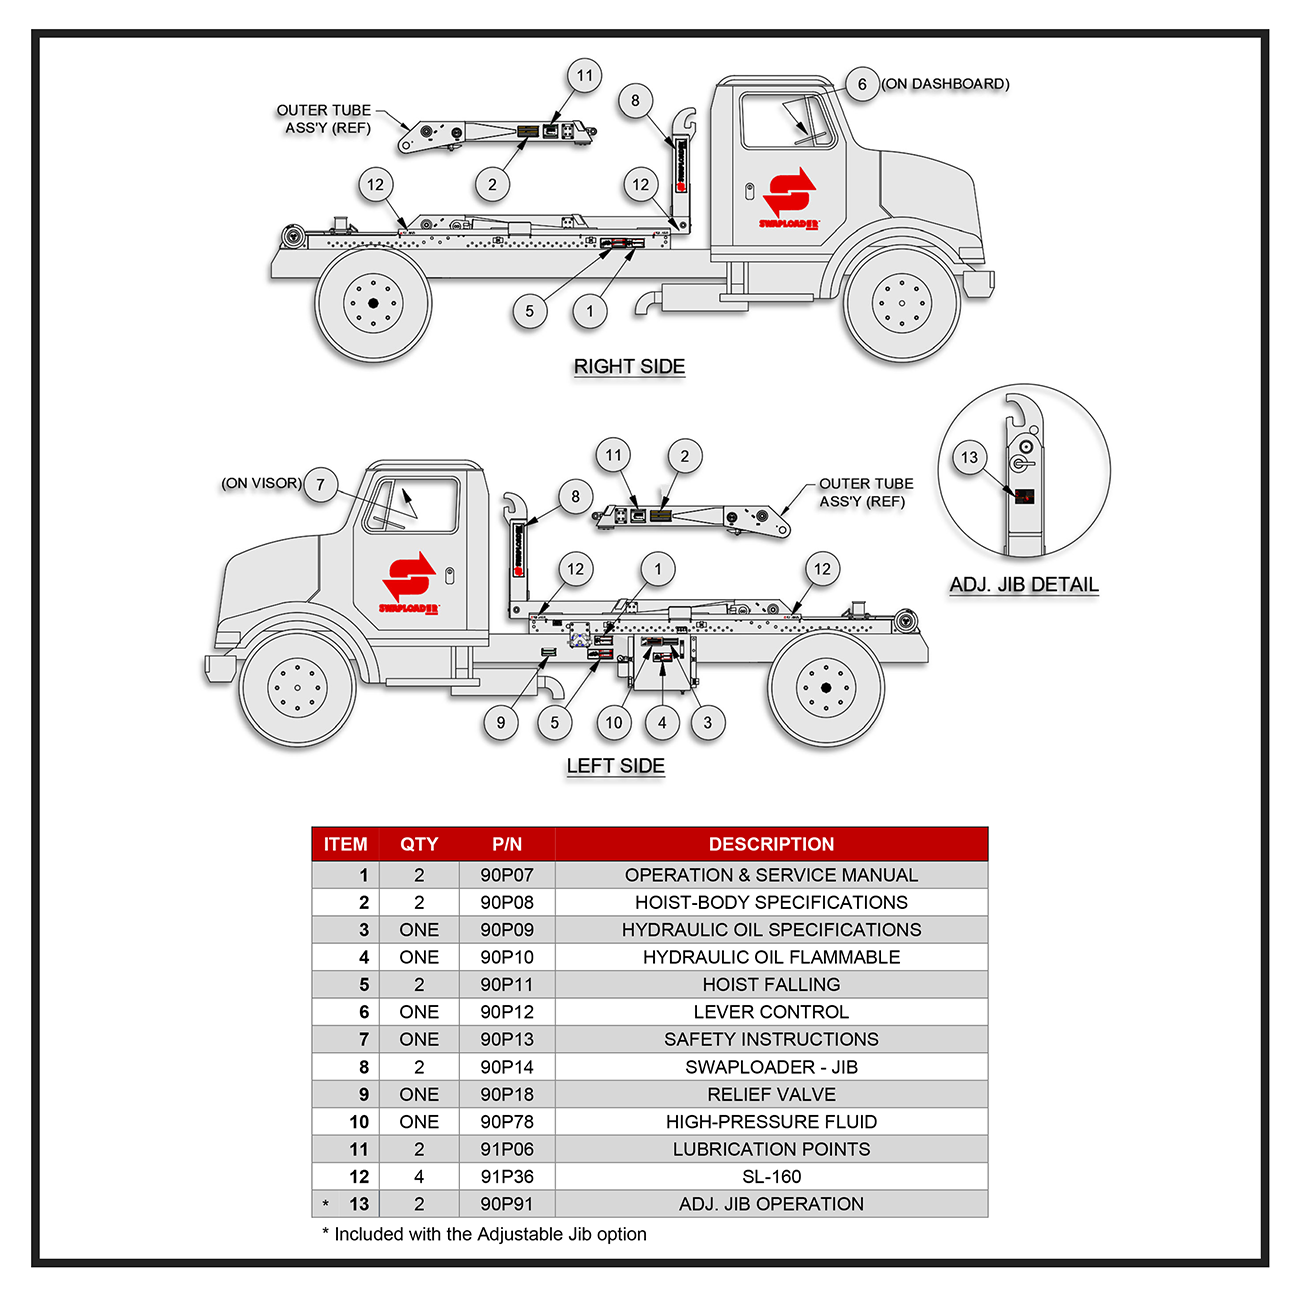 Swaploader SL-160 Decal Assembly Diagram